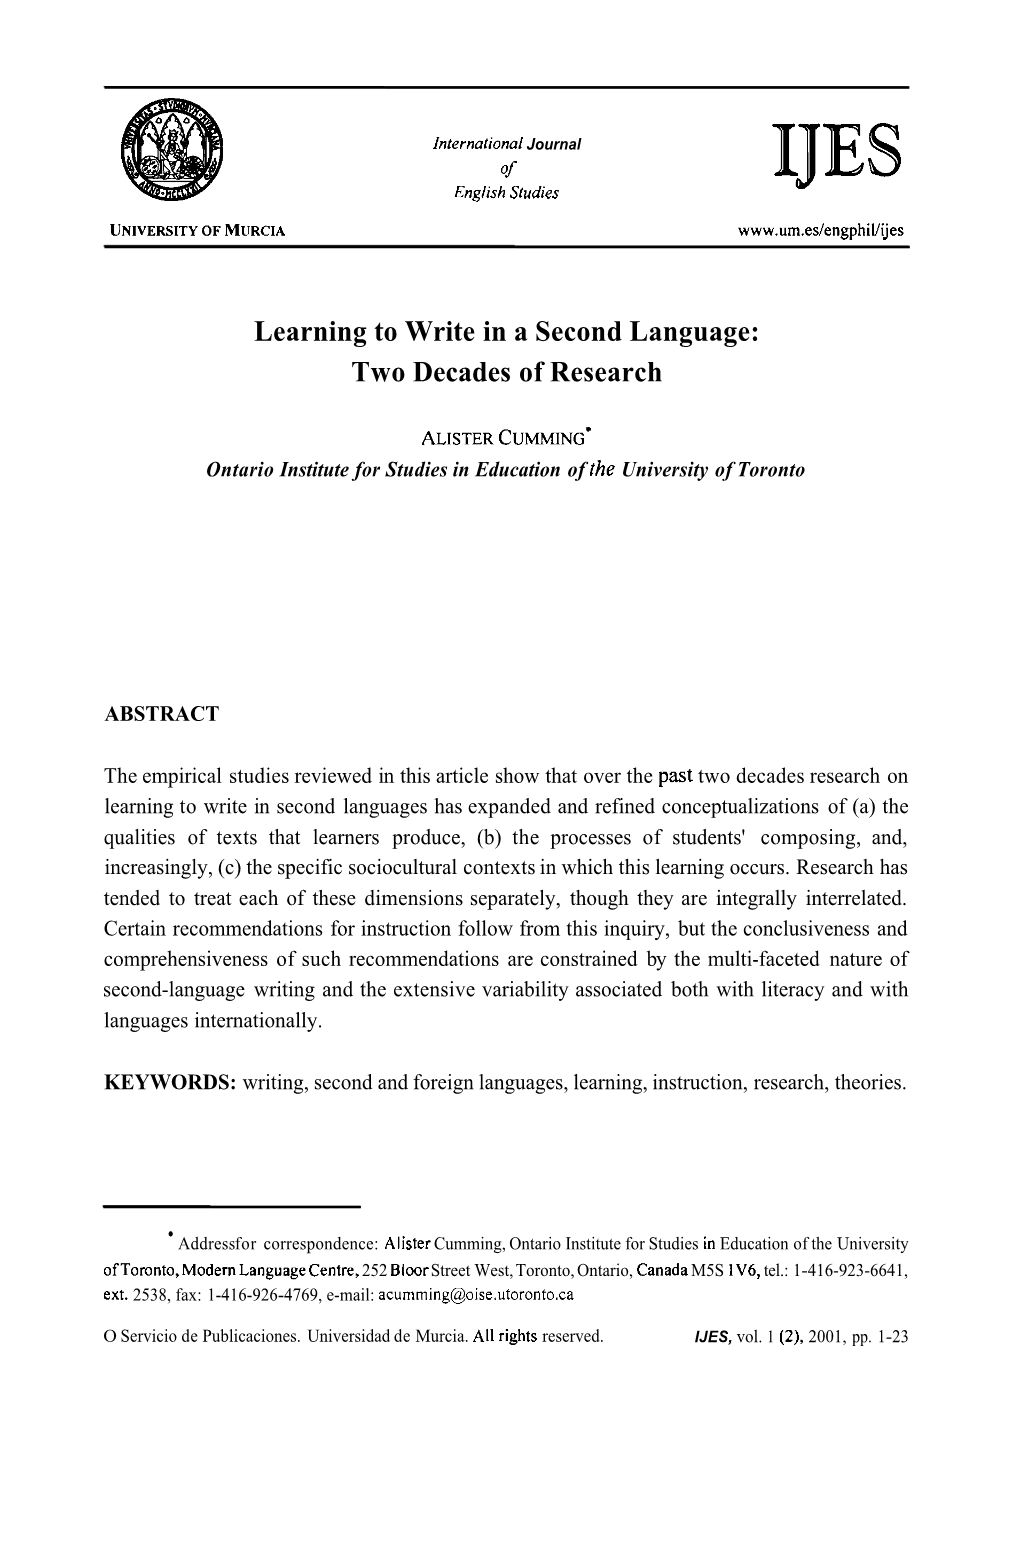 Learning to Write in a Second Language: Two Decades of Research